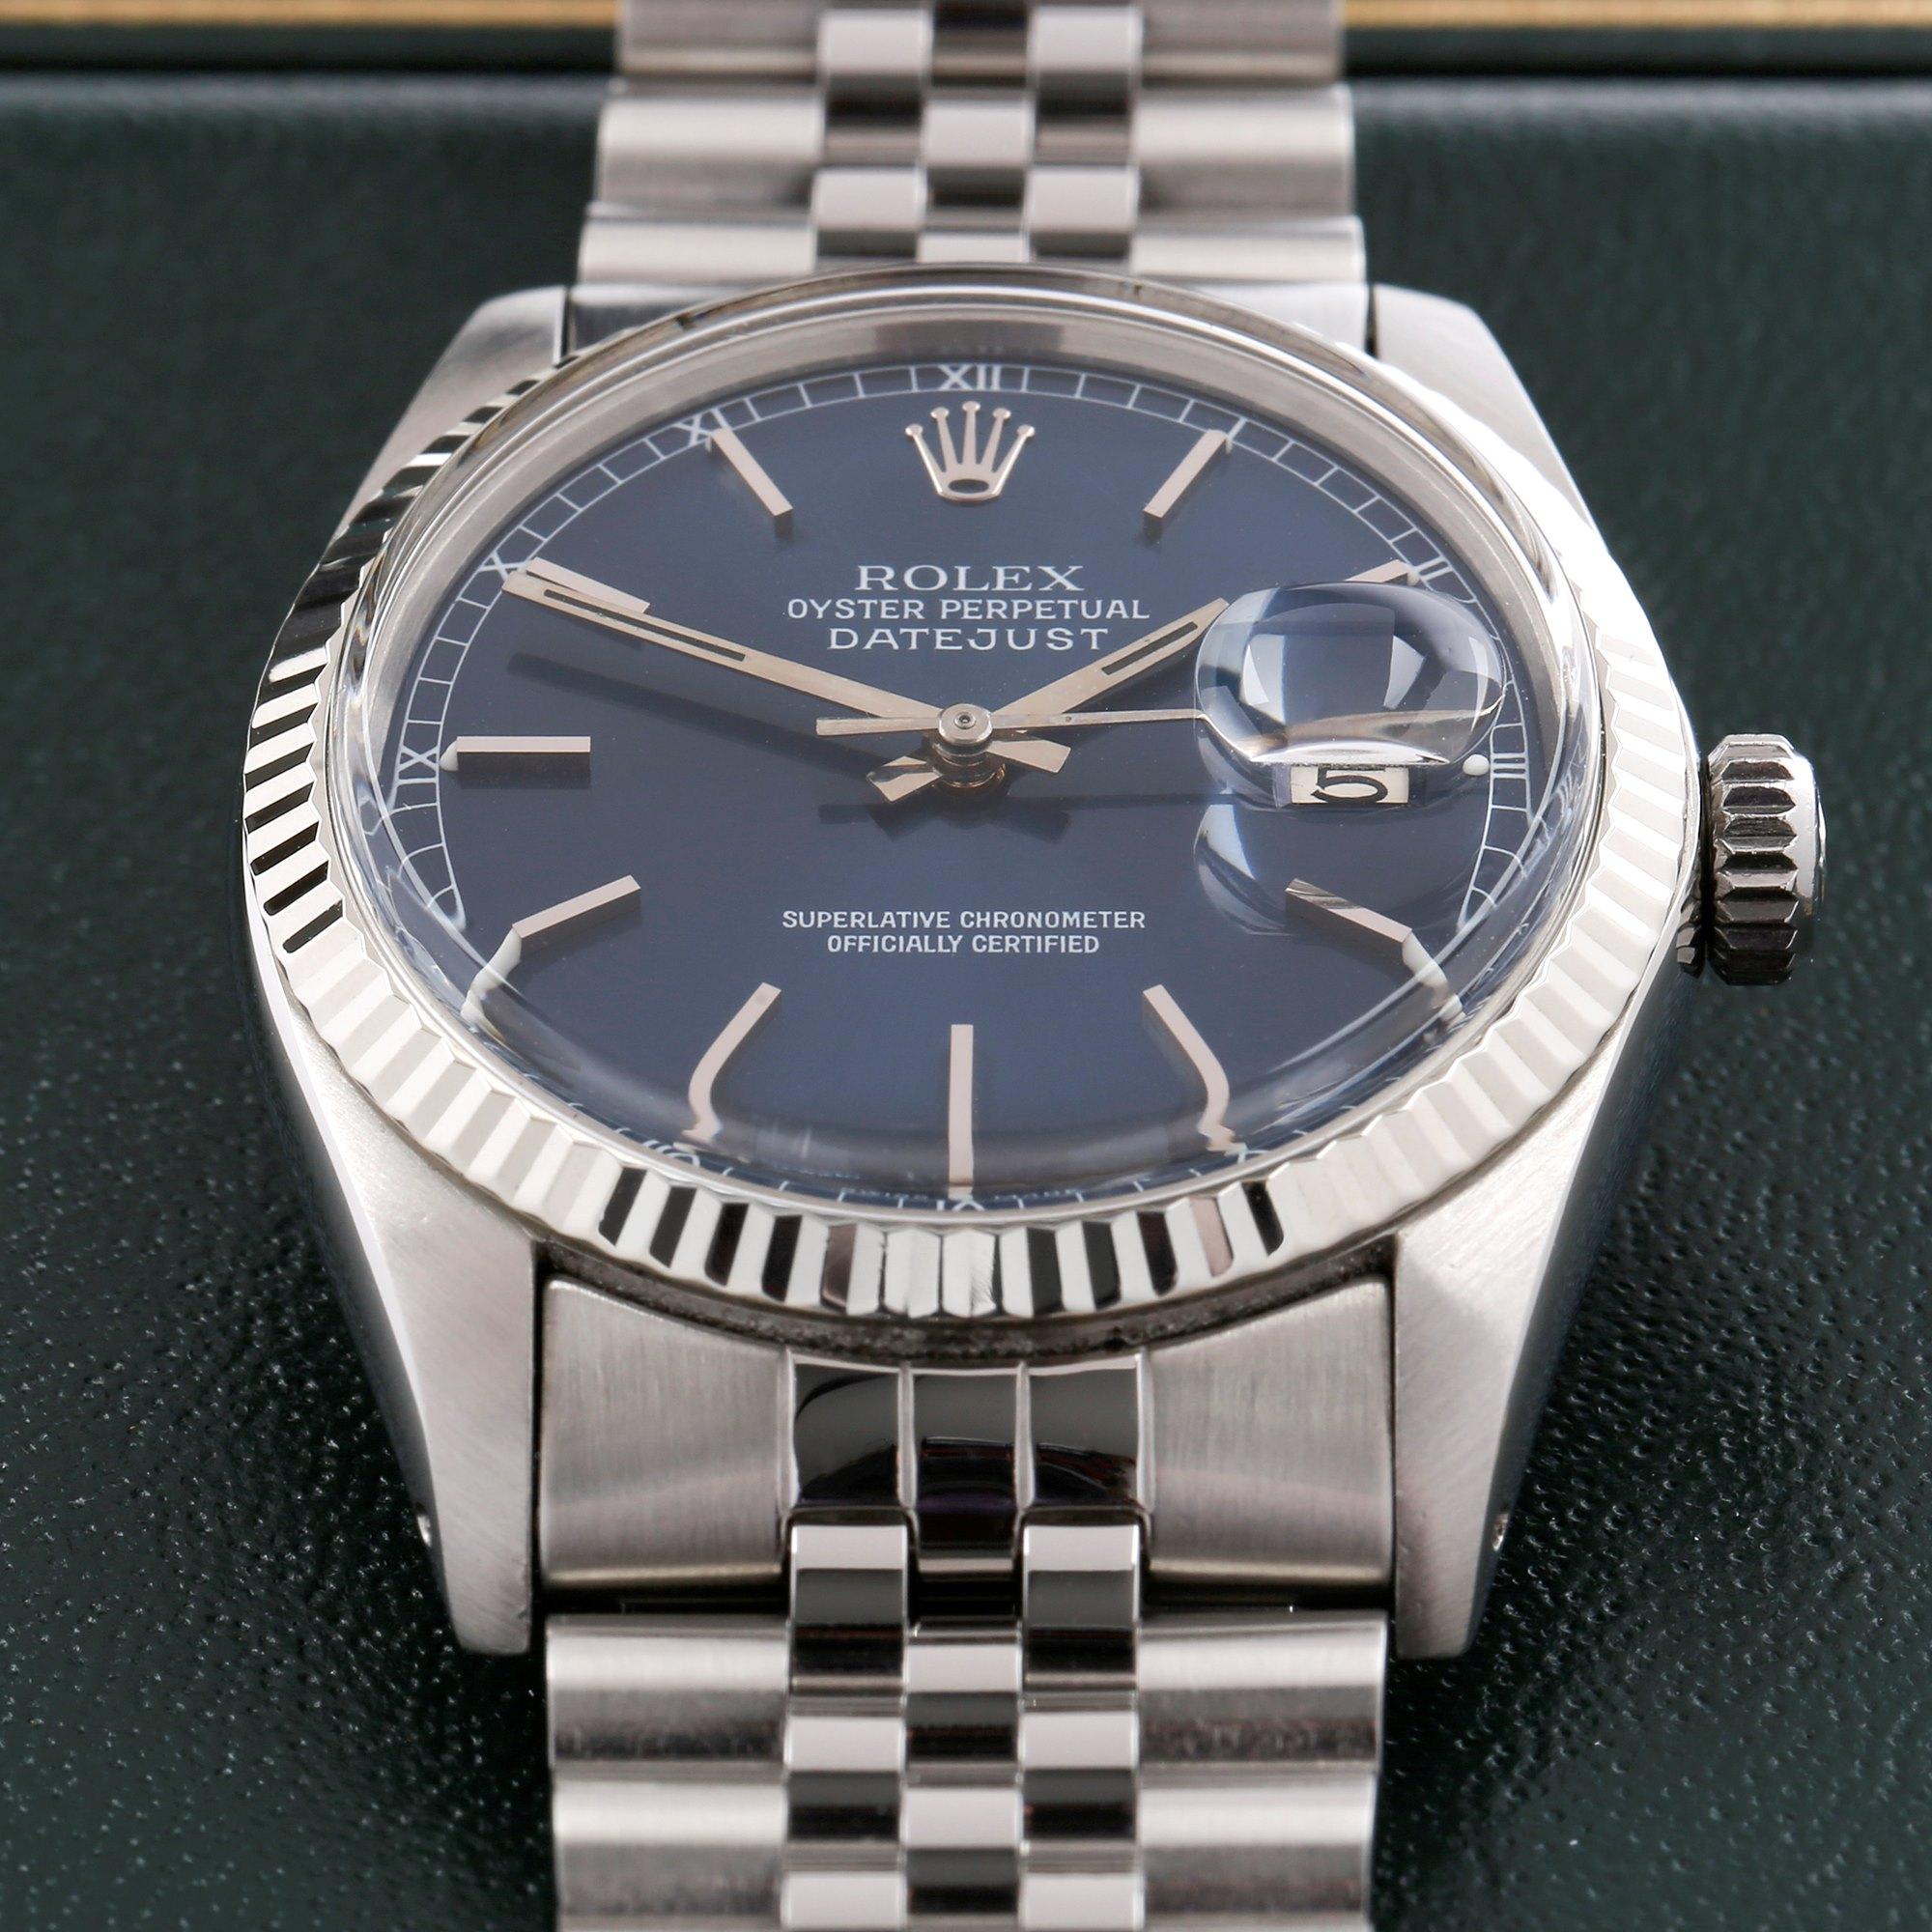 Rolex Datejust 36 16014 Men's Stainless Steel and White Gold Watch 3